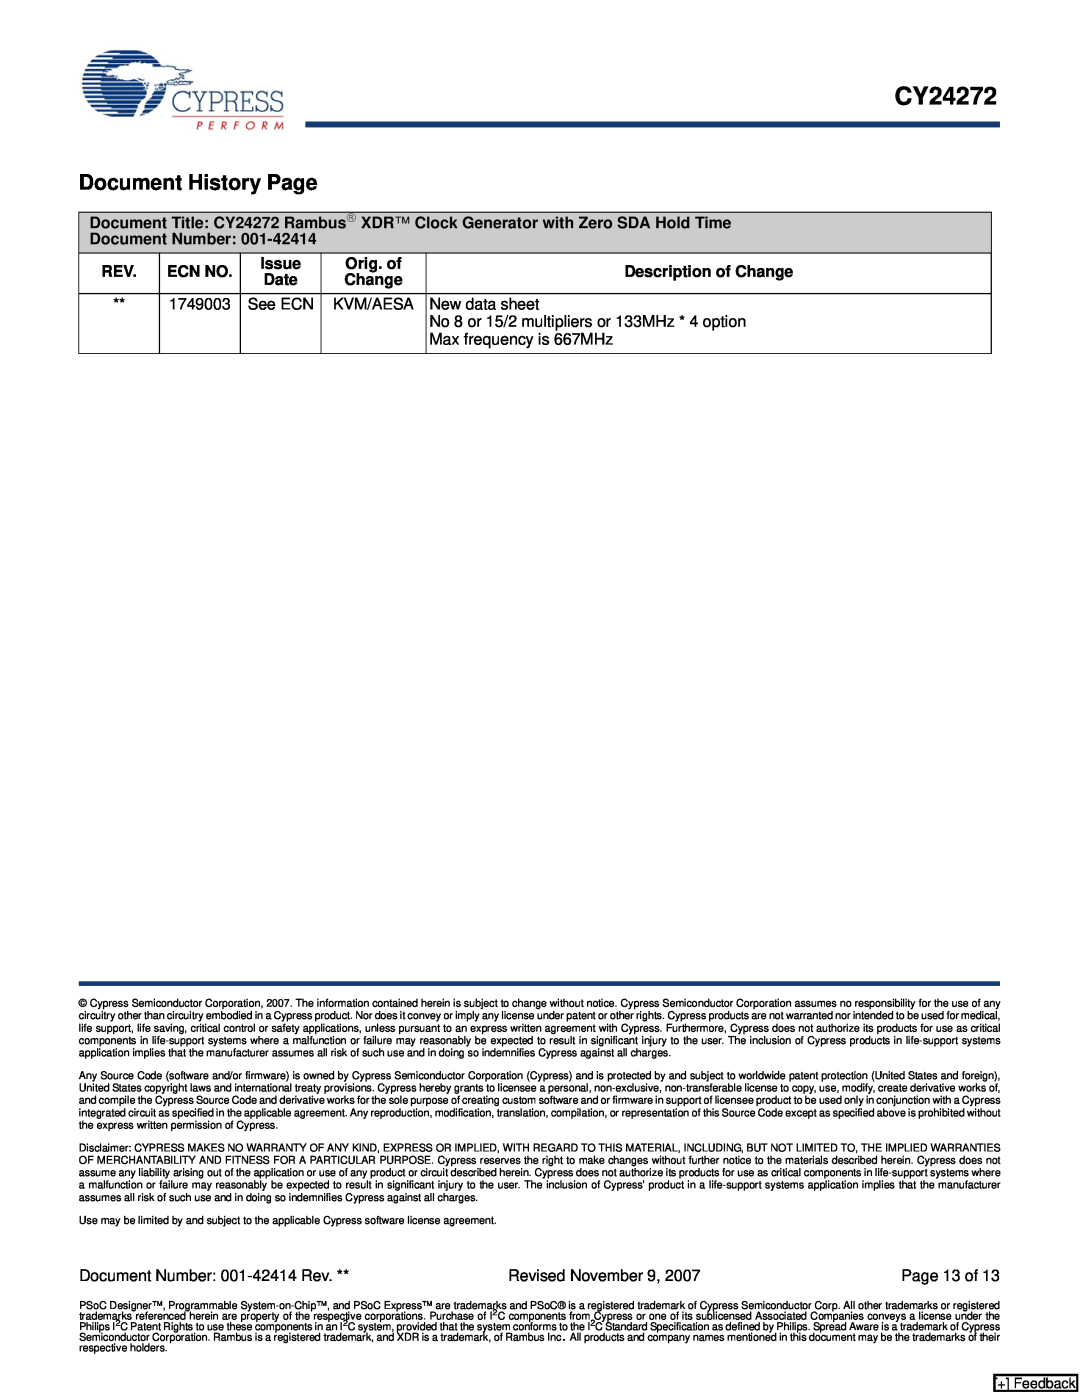 Cypress CY24271 manual Document History Page, CY24272 